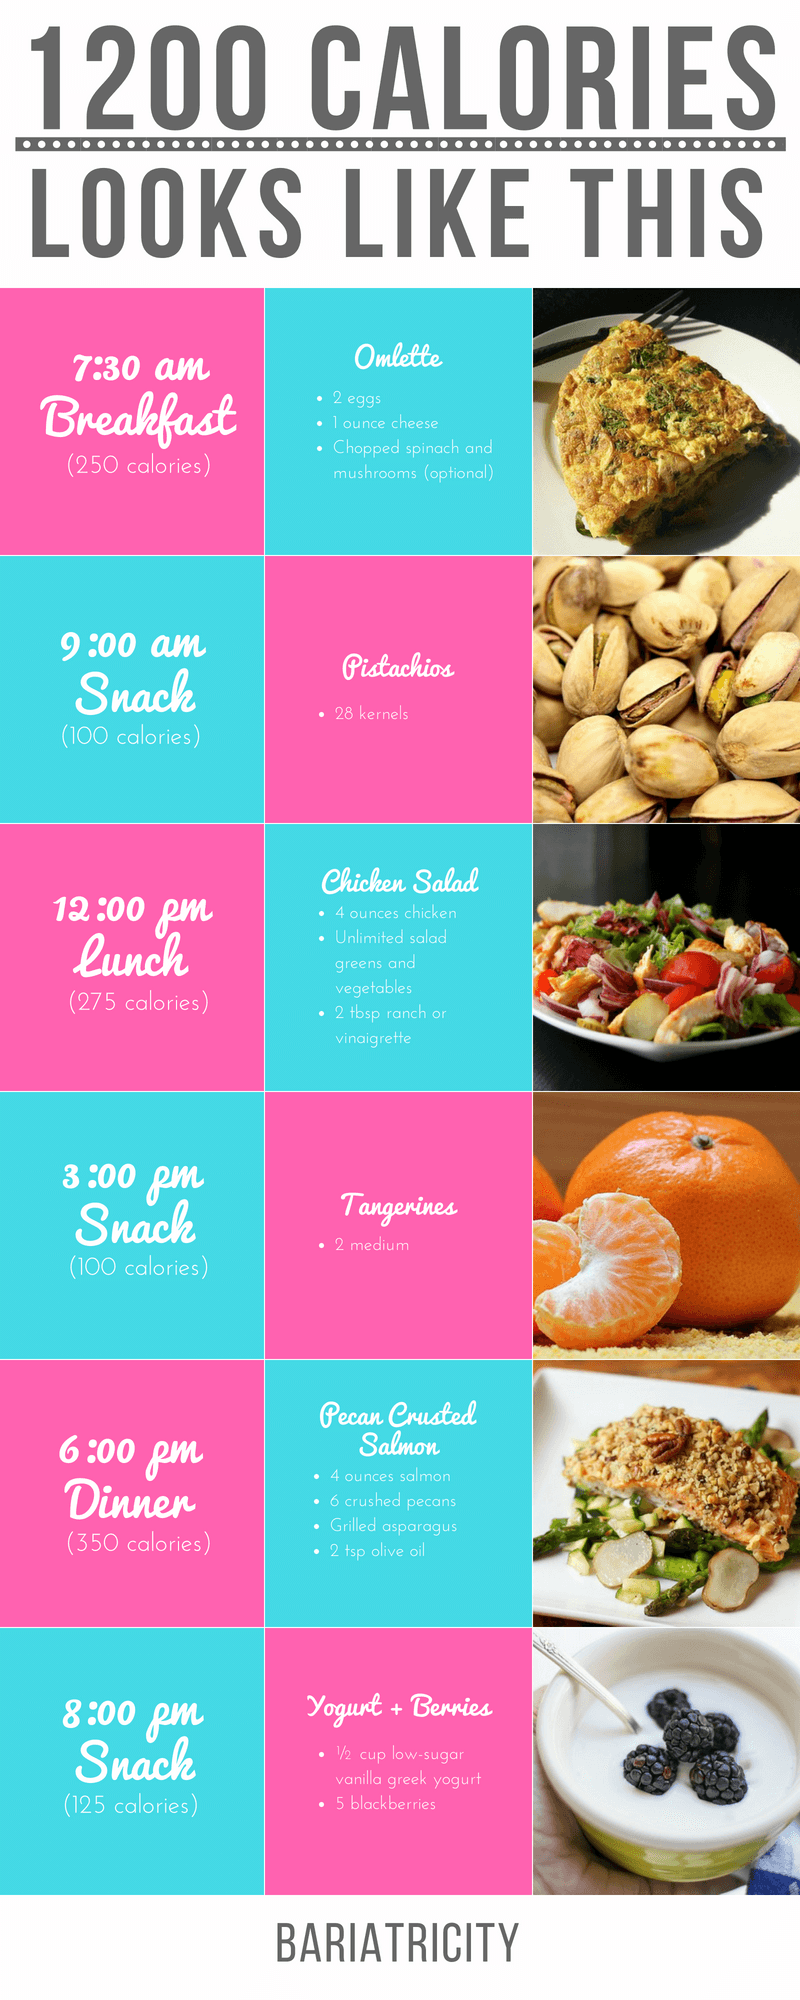 1 200 Calories Looks Like This Diet And Meal Plan 